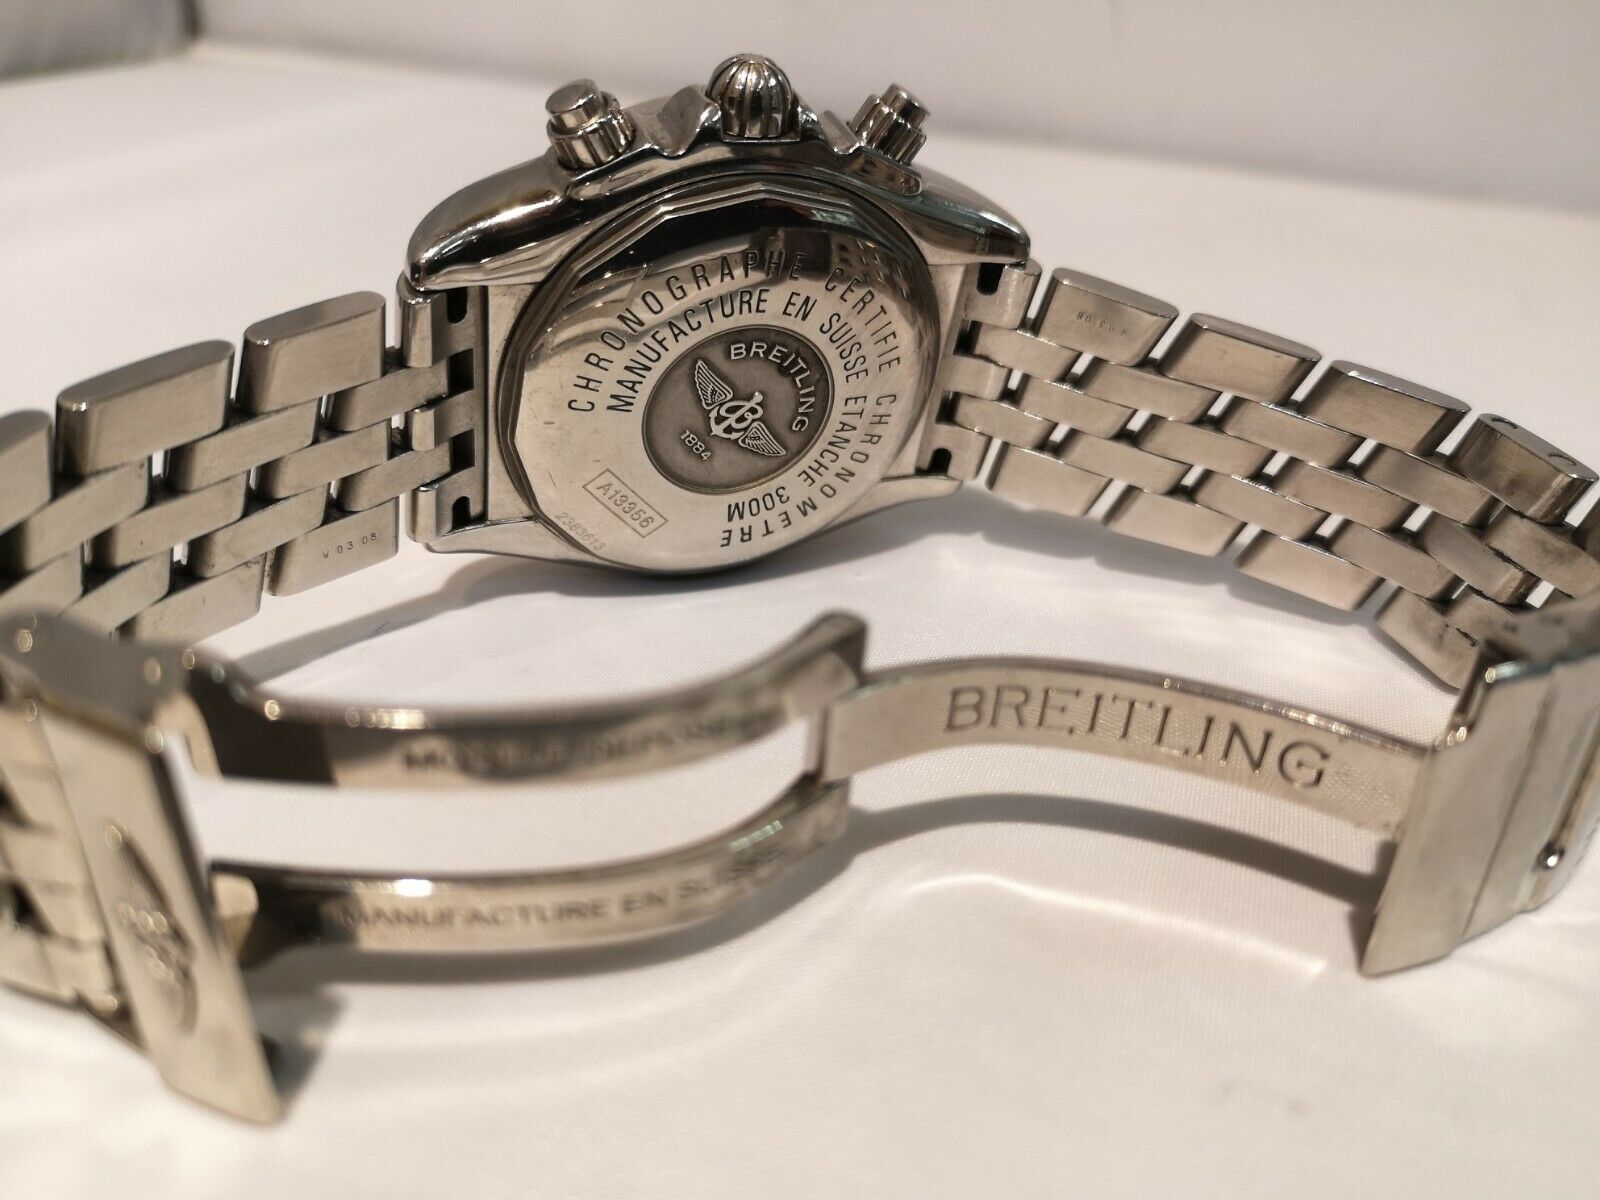 Breitling 1884 Chronographe Automatic Watch A13356 186429 